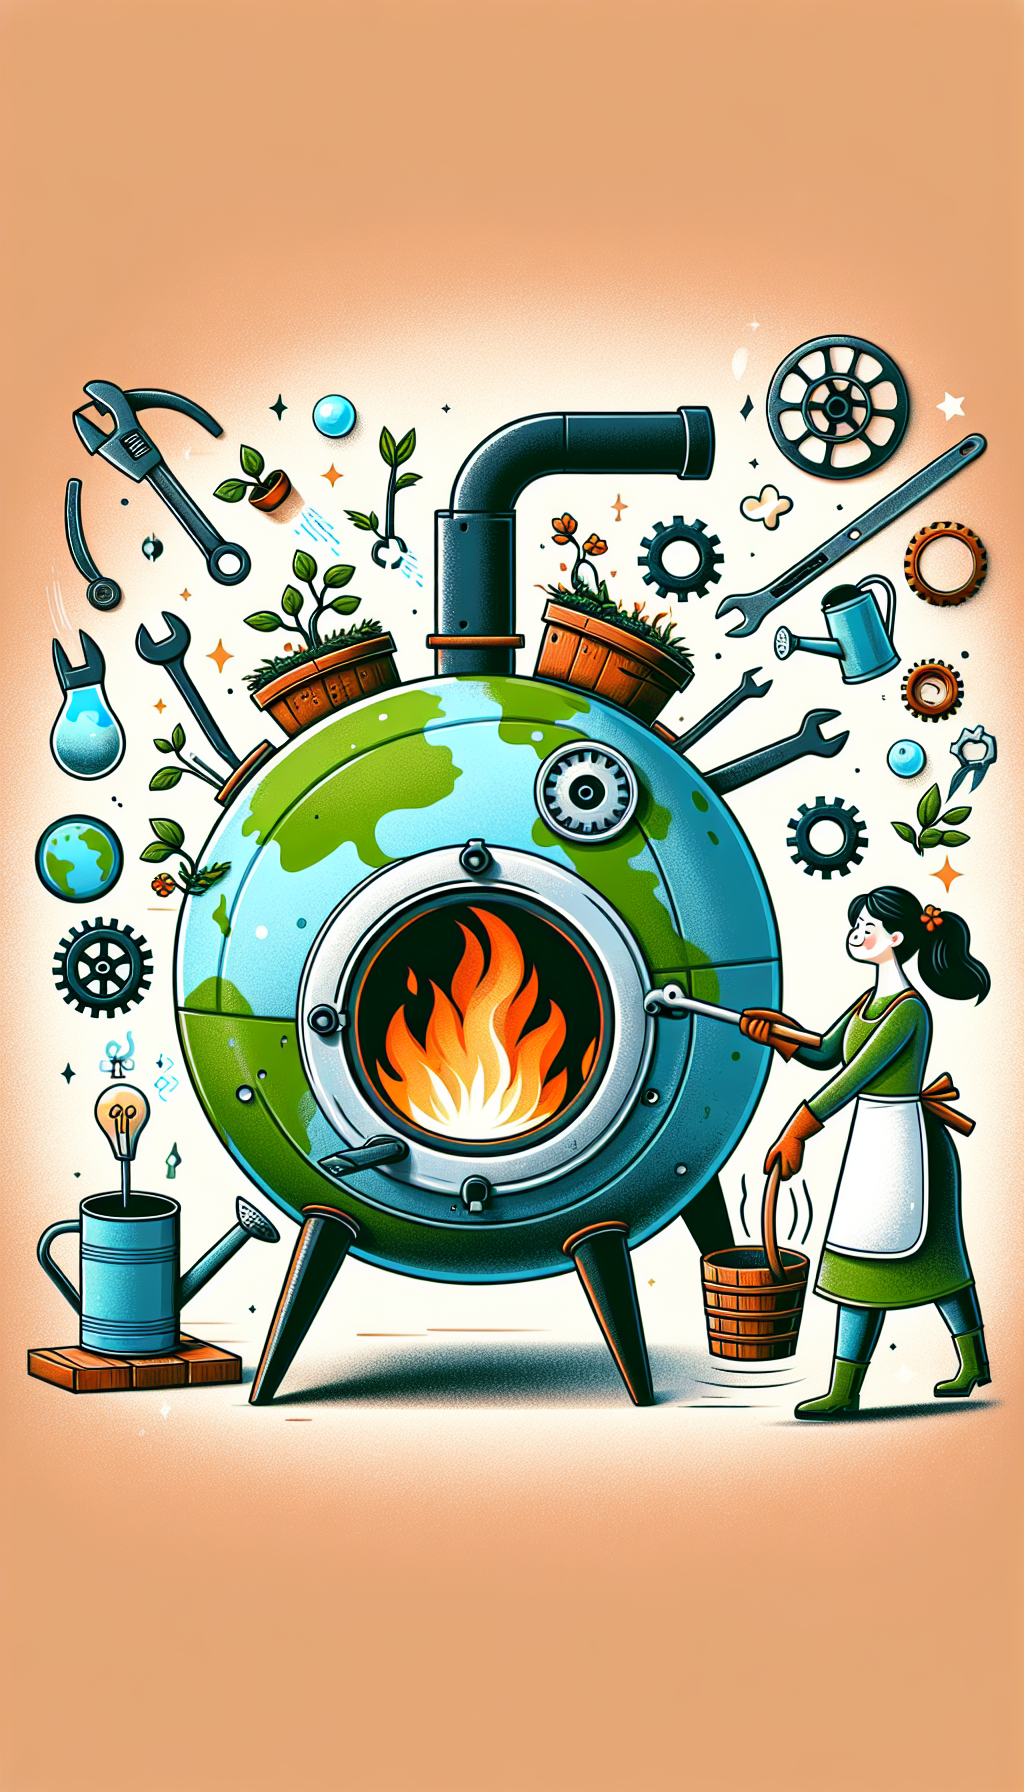 An illustration depicts a whimsical Earth-shaped wood stove with gears and tools floating around it. A gardener, whimsically stylized as a diligent mechanic, tends to the stove with a watering can of oil and a pruning shear-wrench hybrid. A healthy, vibrant flame nurtures a sprouting plant on top, symbolizing the Earth Stove's value through sustained, efficient warmth and environmental harmony.